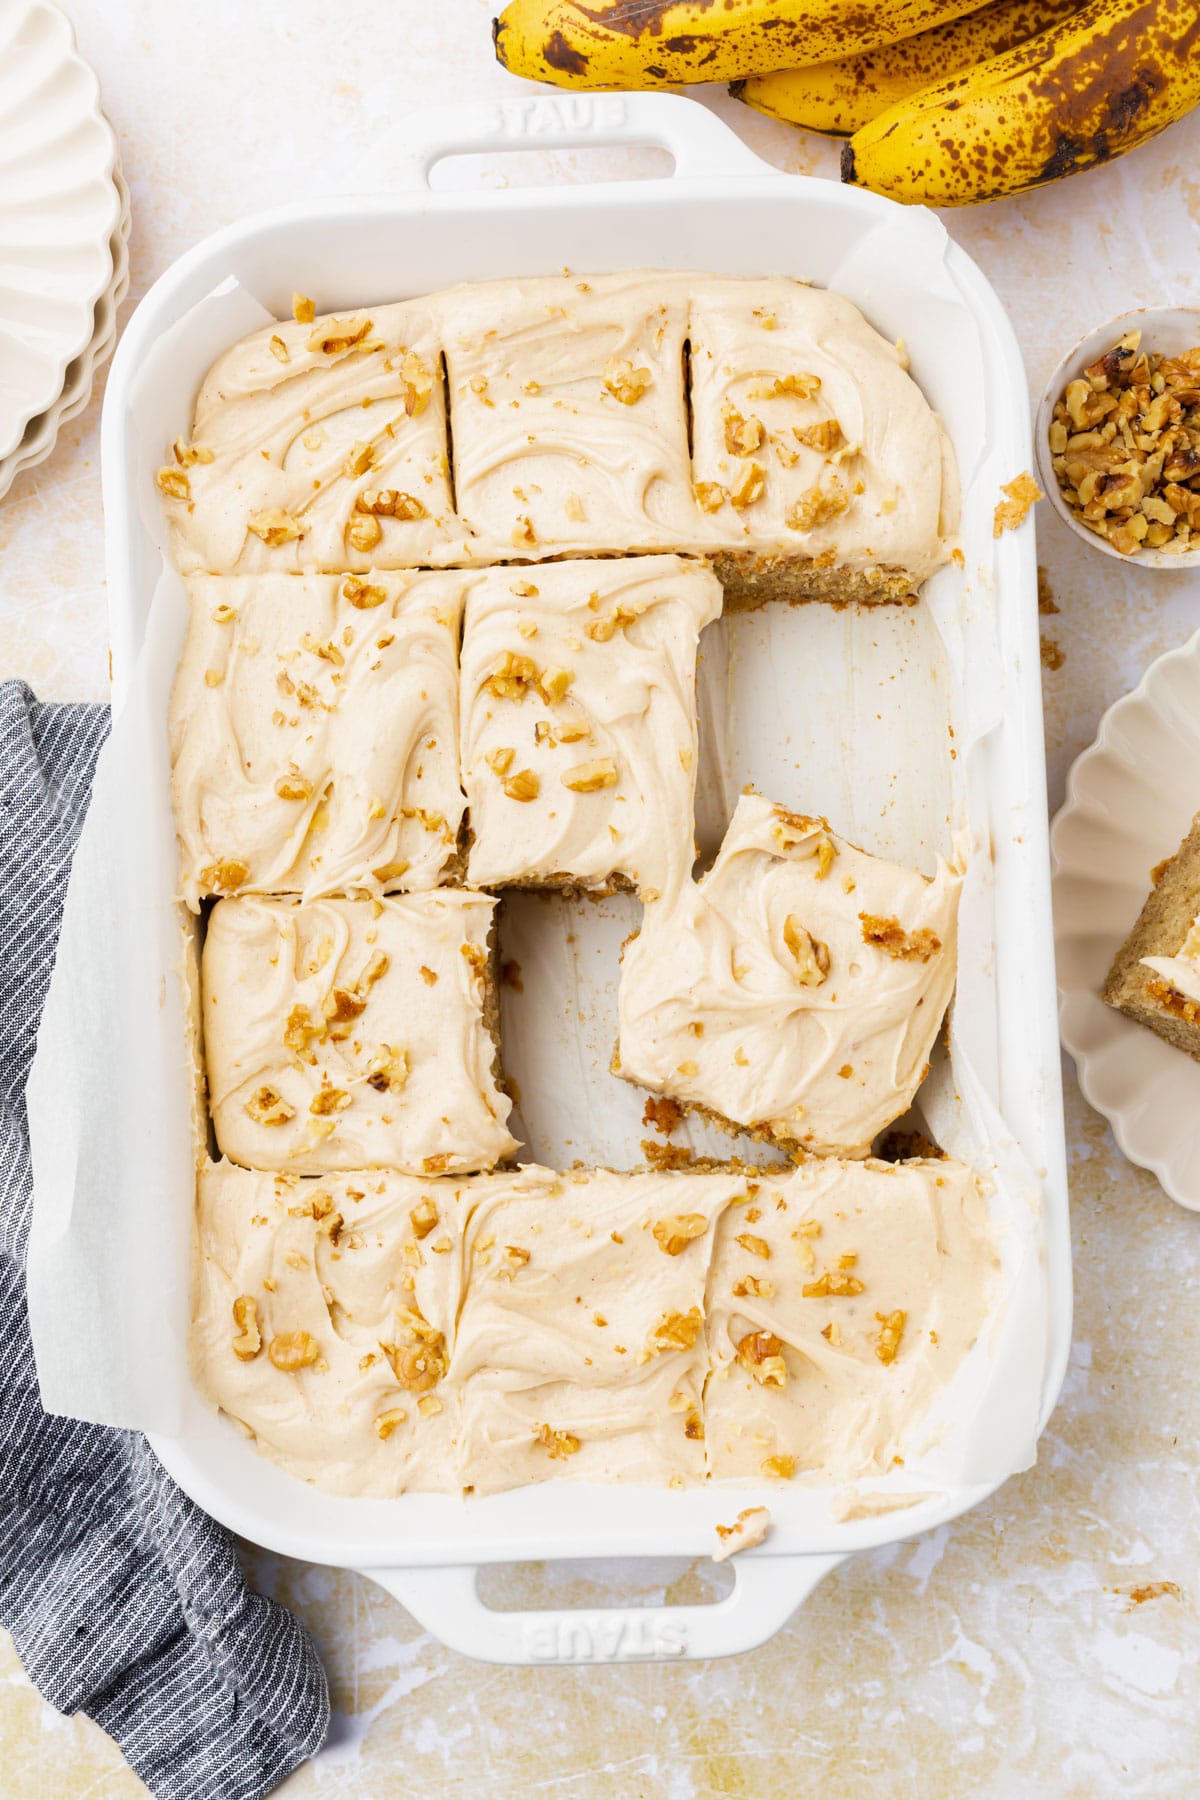 Slices of banana cake in a baking dish topped with cream cheese frosting and walnuts.